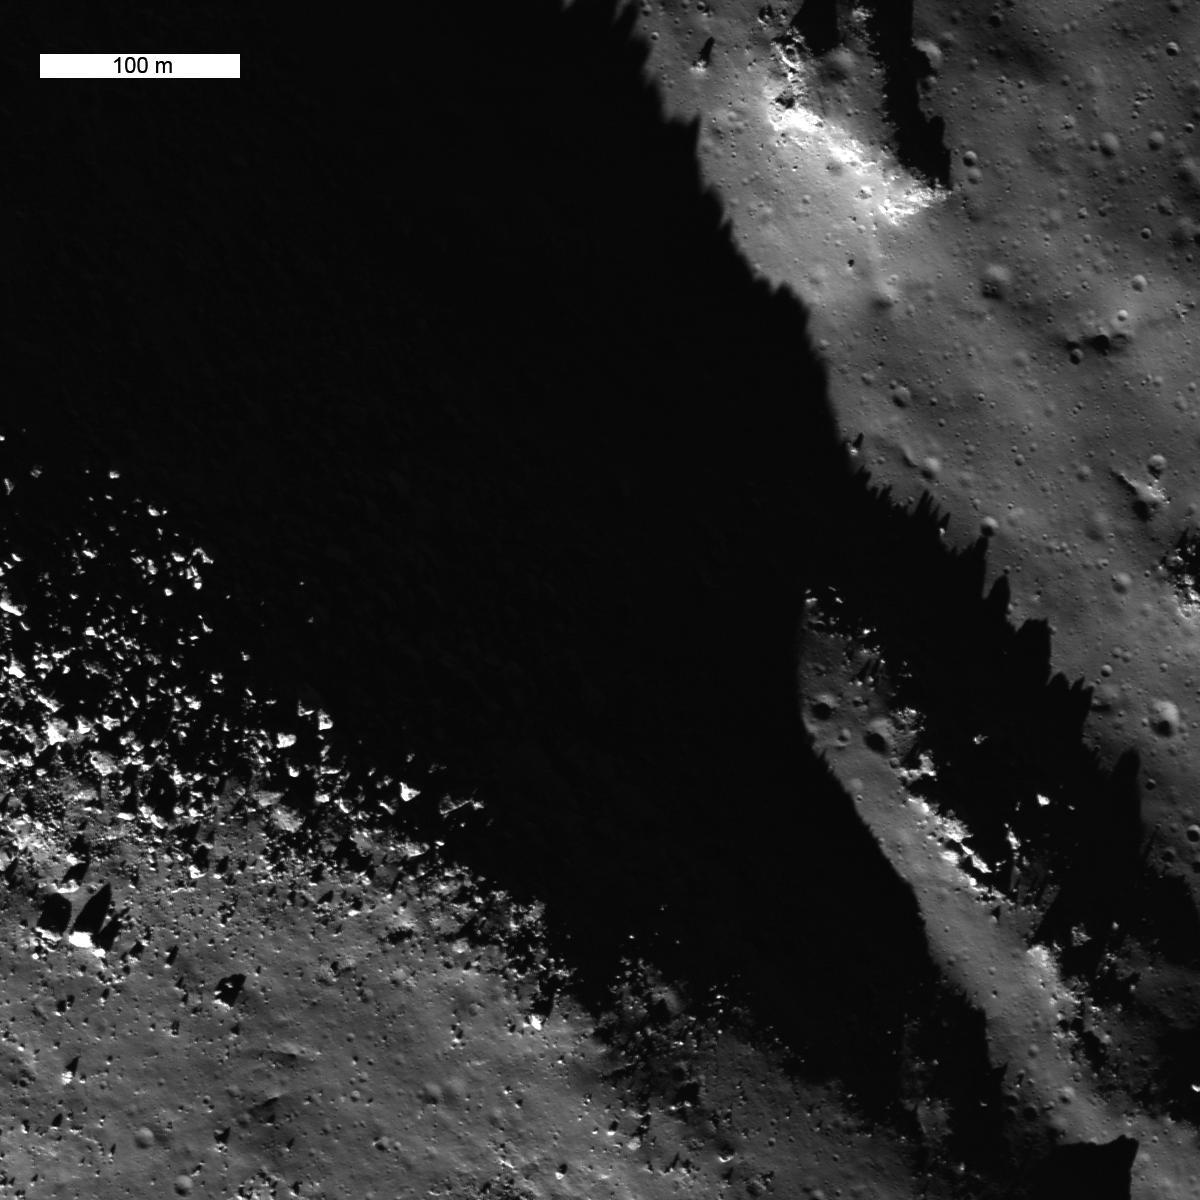 shadowy depths and brightly-illuminated rocks on the Moon